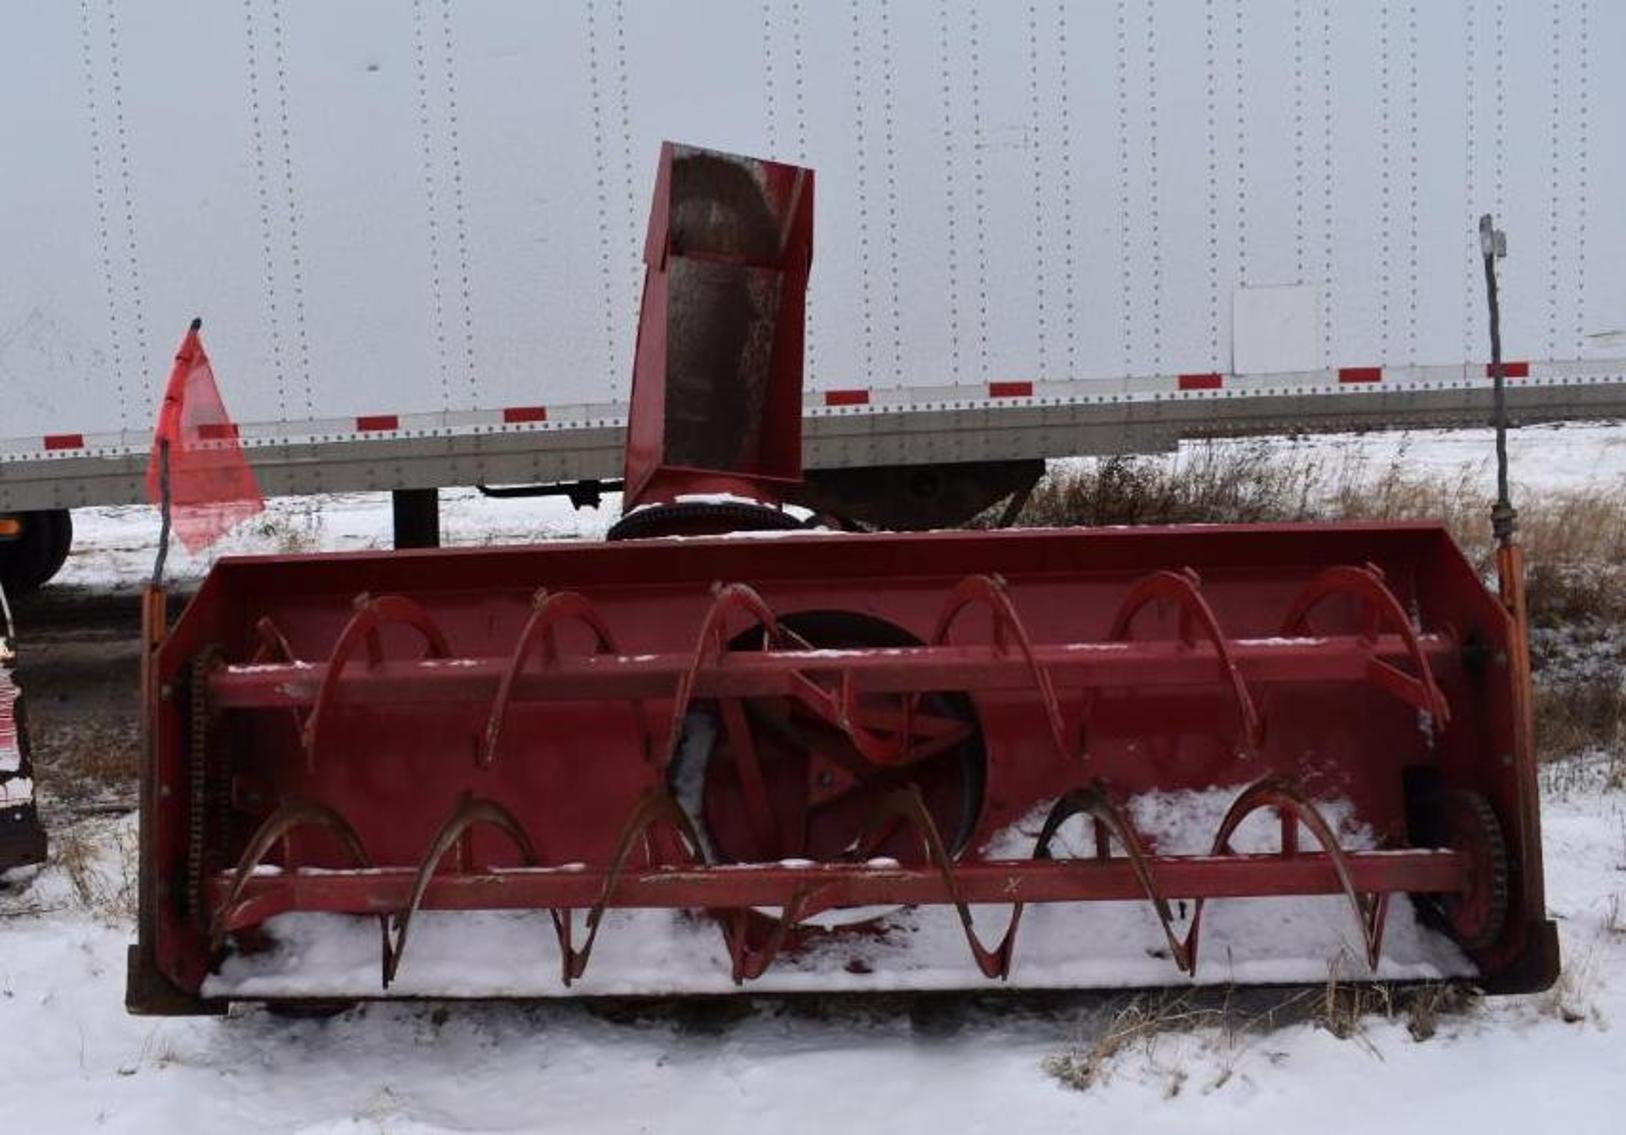 Snow Removal Equipment: (2) MT5 Trackless, Snowplow, Snowblower, & (3) Snowmobiles